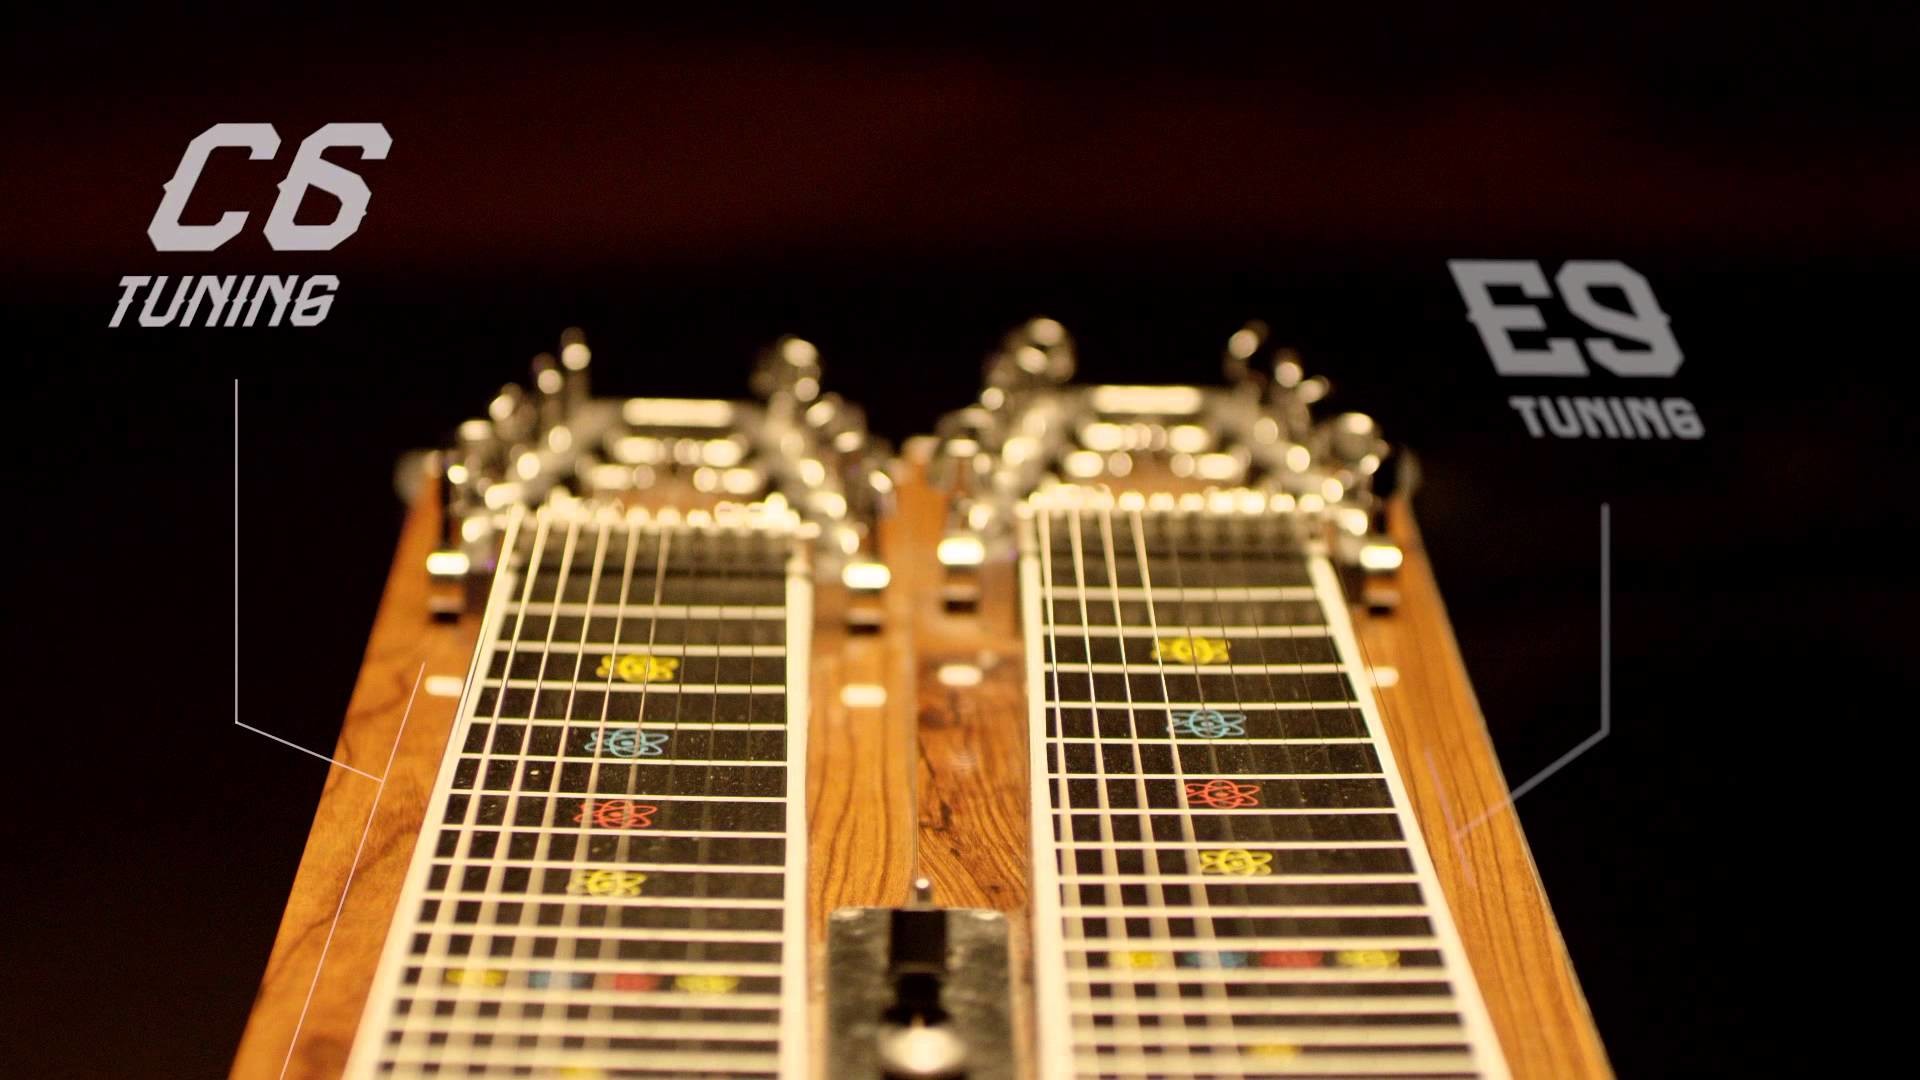 1920x1080 The Pedal Steel Guitar | Ram Trucks | Under The Hood Of Country Music